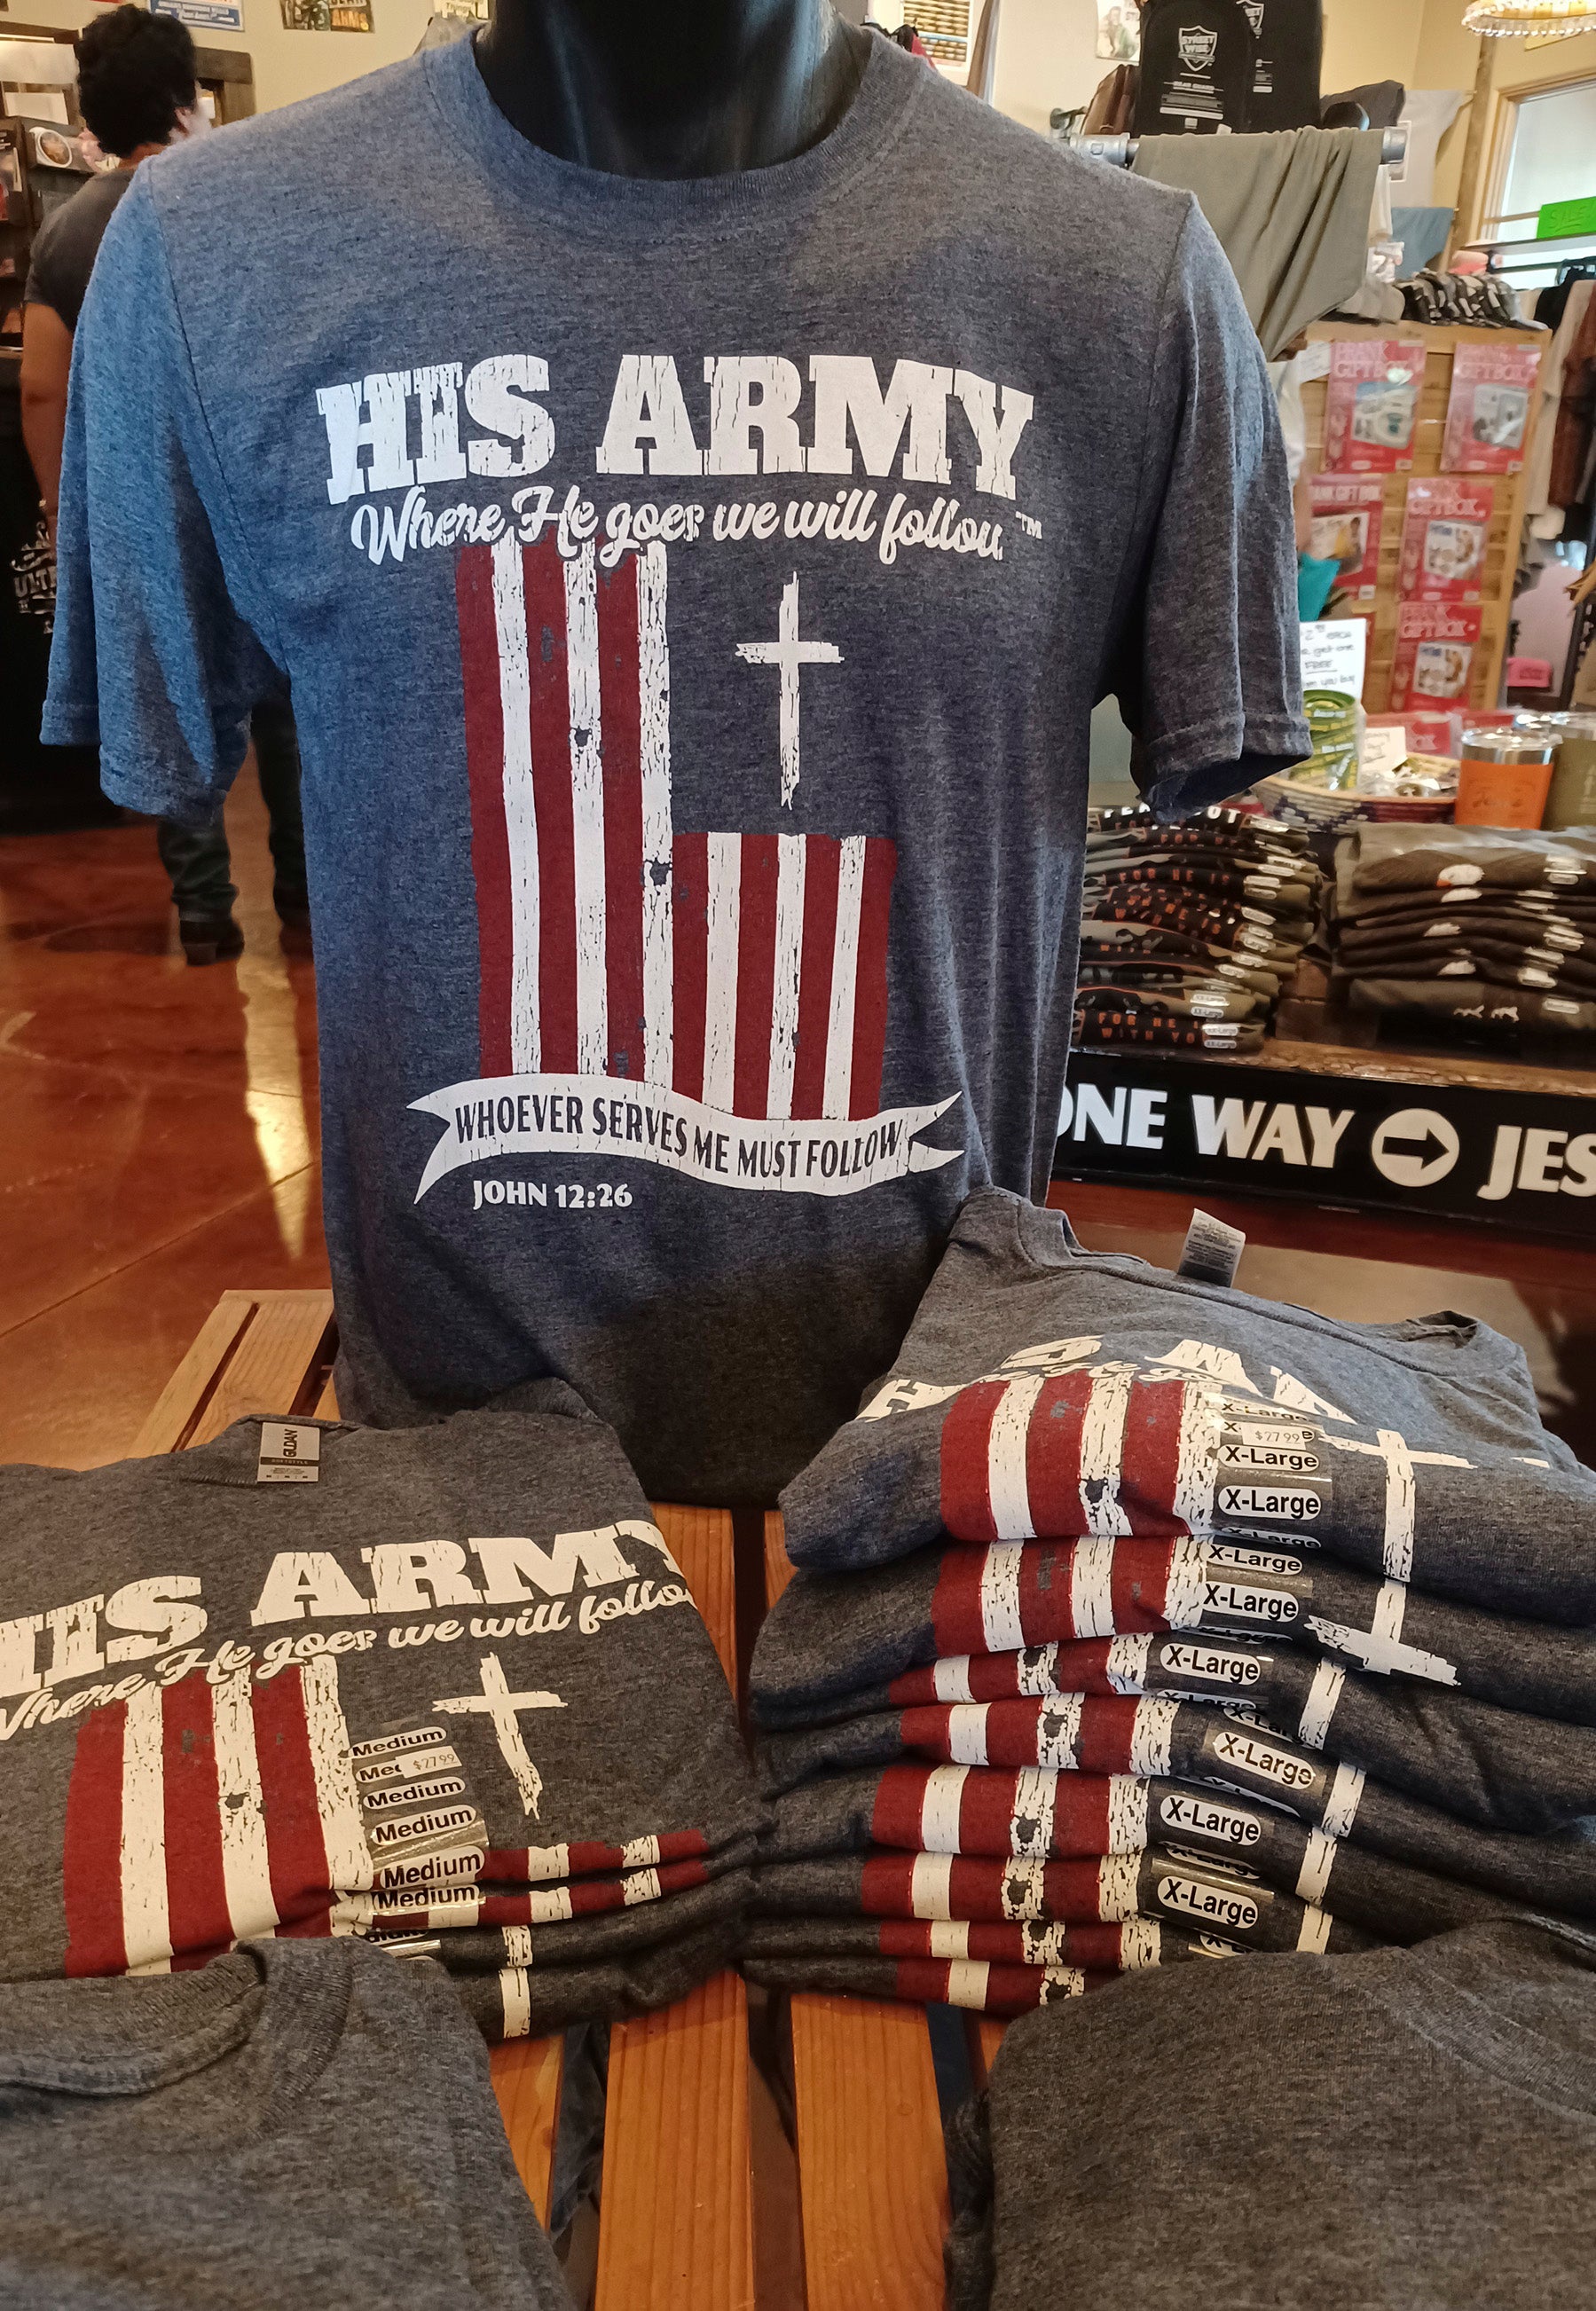 Christian patriot shirt for sale in store